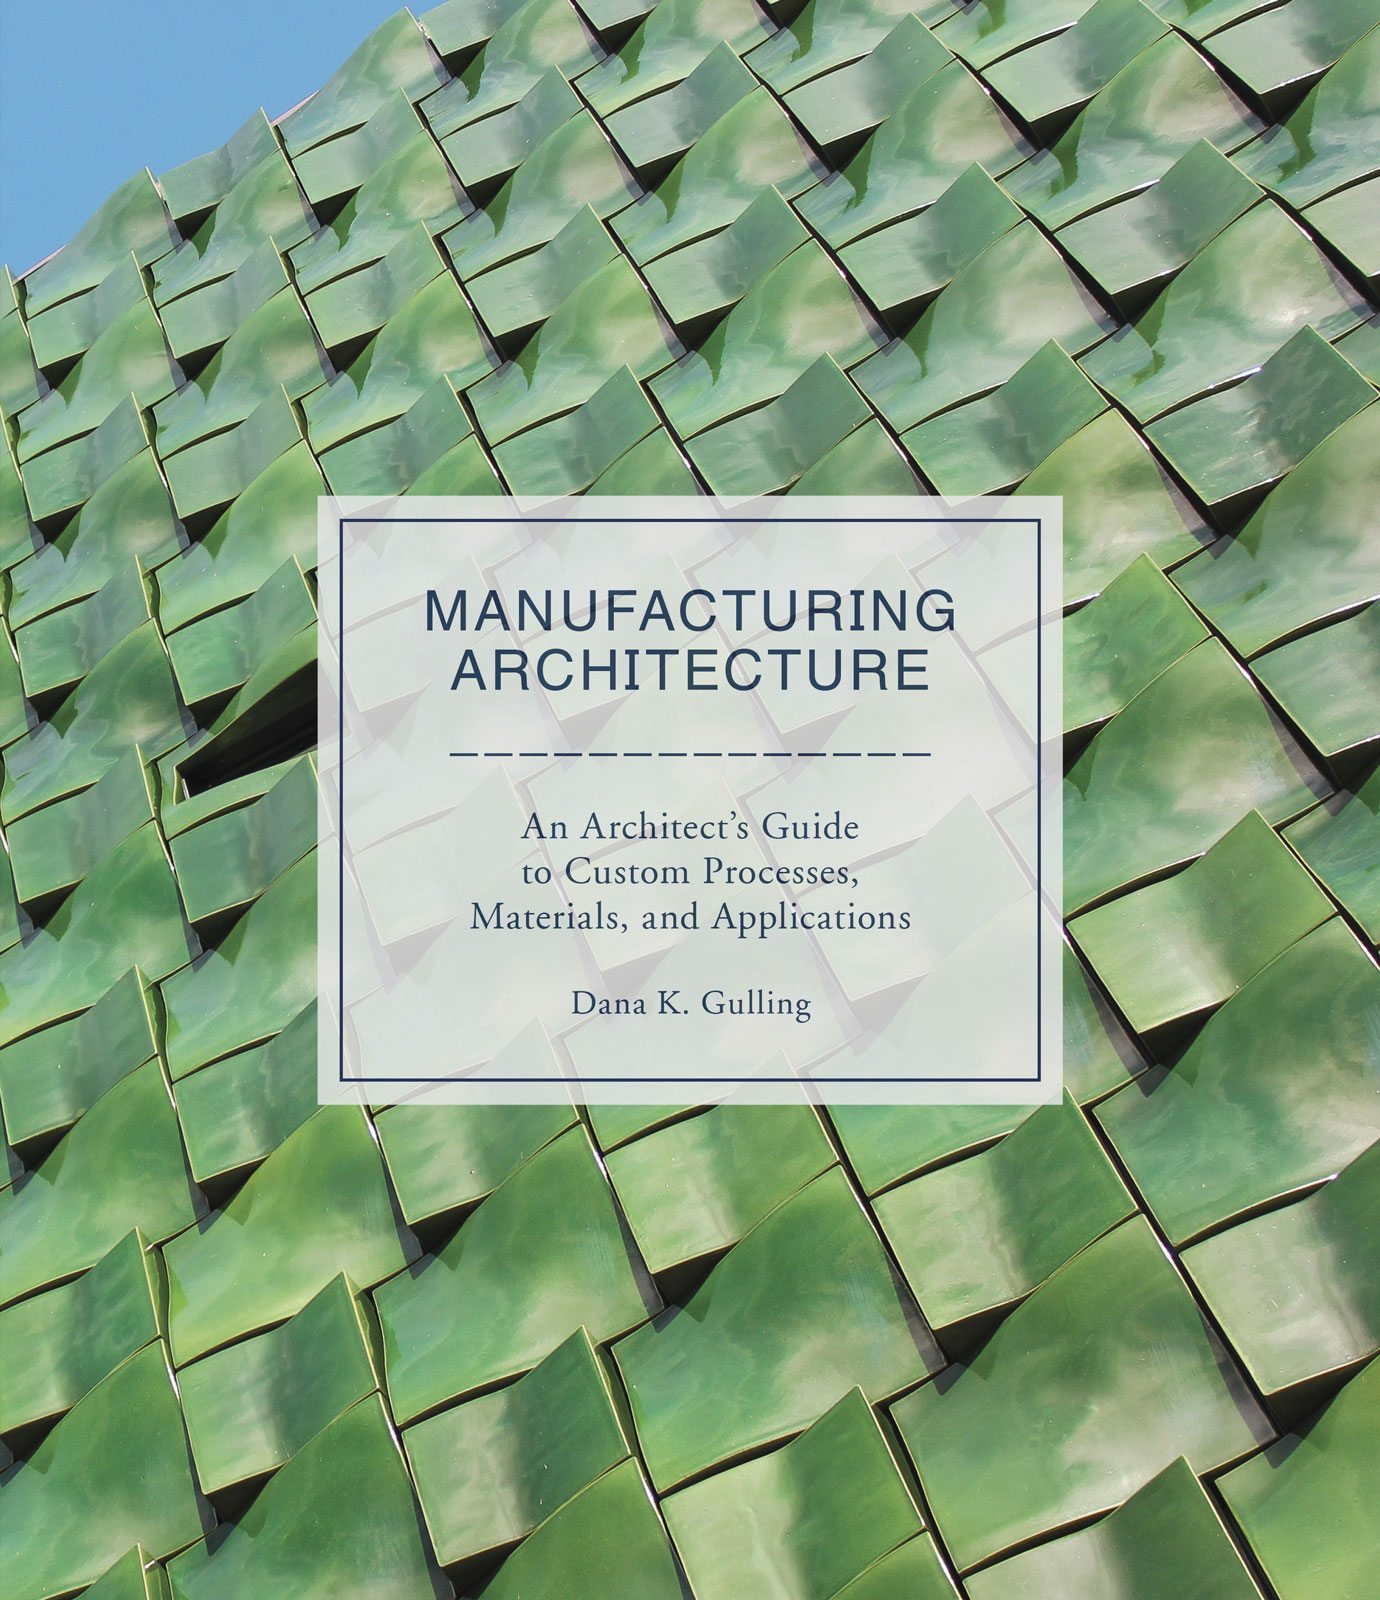 Manufacturing Architecture: An Architect's Guide to Custom Processes, Materials, and Applications